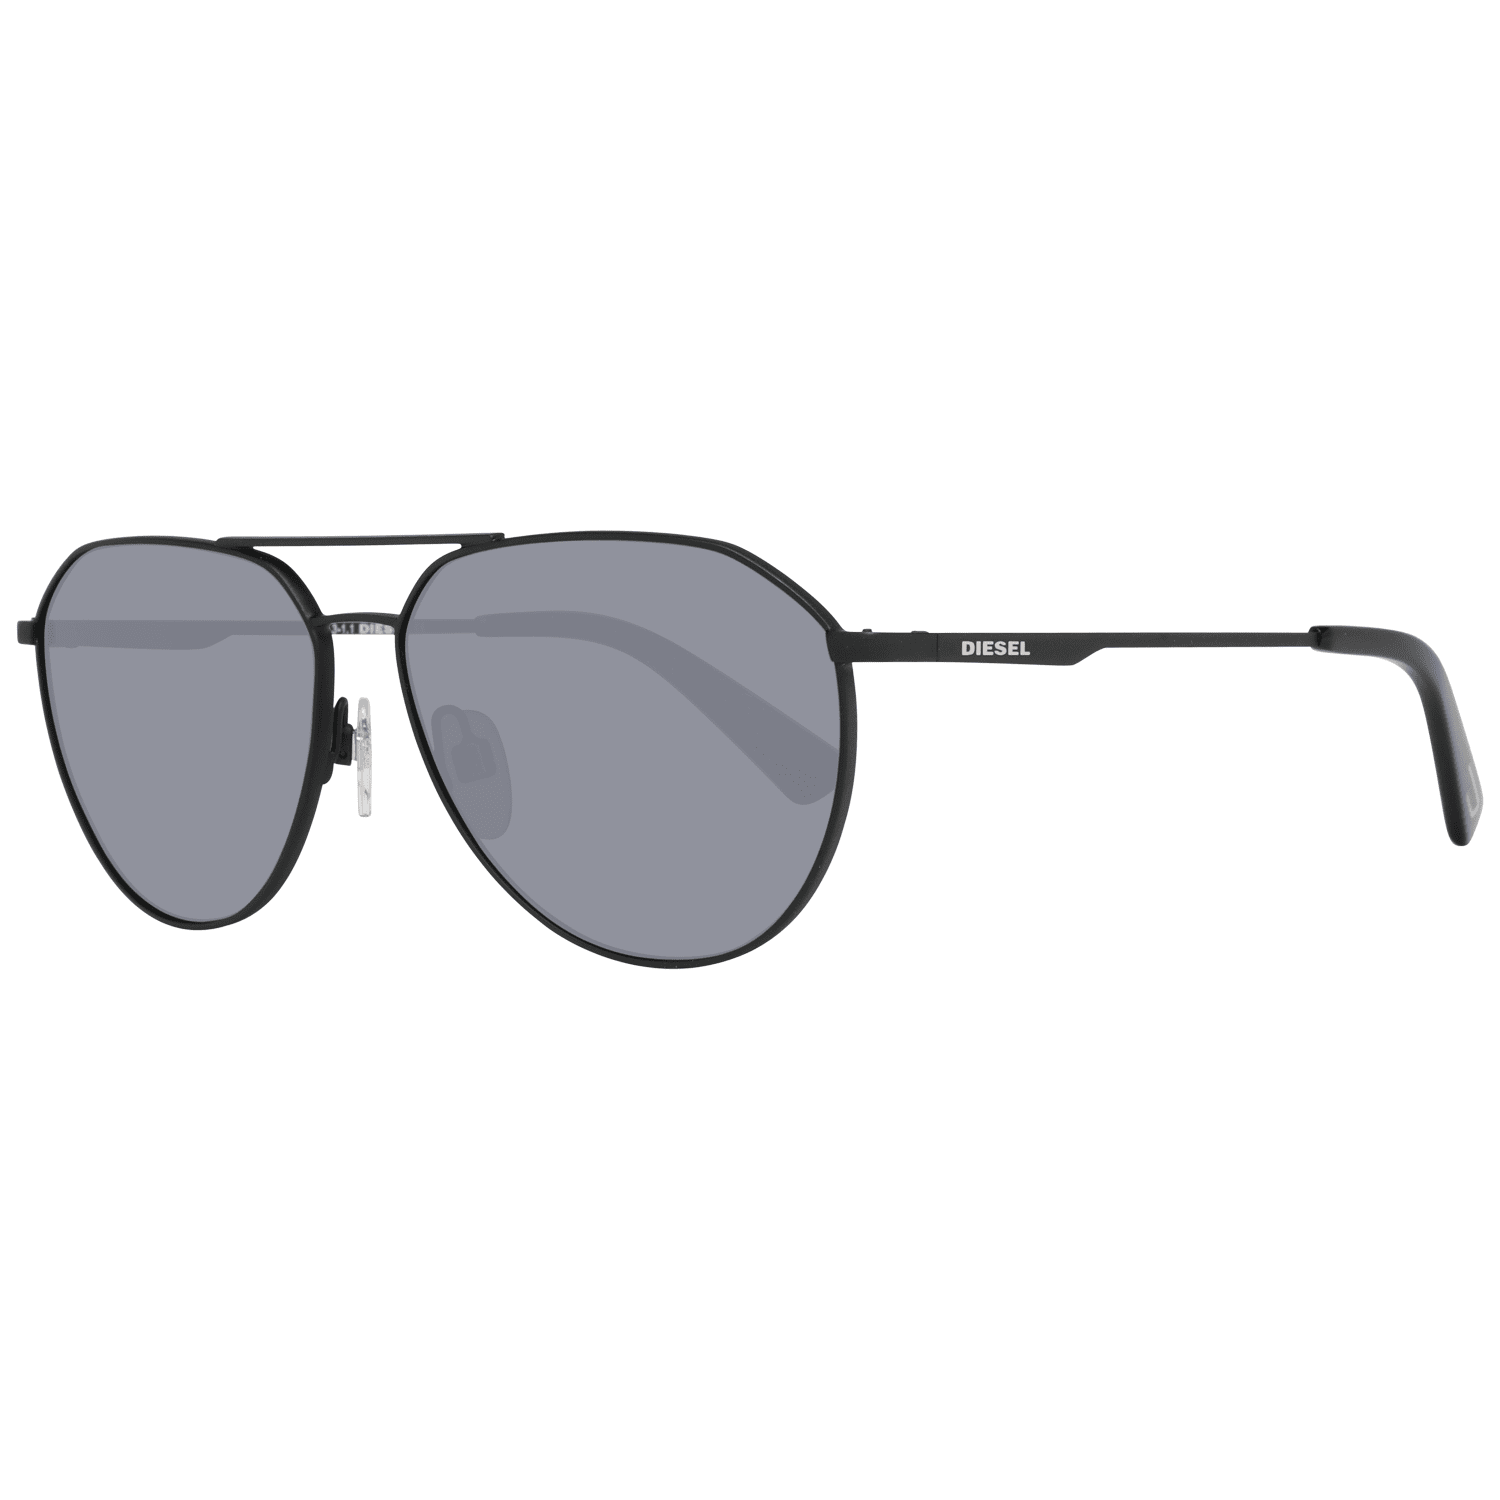 Diesel DL0296 02A Black Sunglasses. Lens Width = 58mm. Nose Bridge Width = 13mm. Arm Length = 145mm. Sunglasses, Sunglasses Case, Cleaning Cloth and Care Instrtions all Included. 100% Protection Against UVA & UVB Sunlight and Conform to British Standard EN 1836:2005